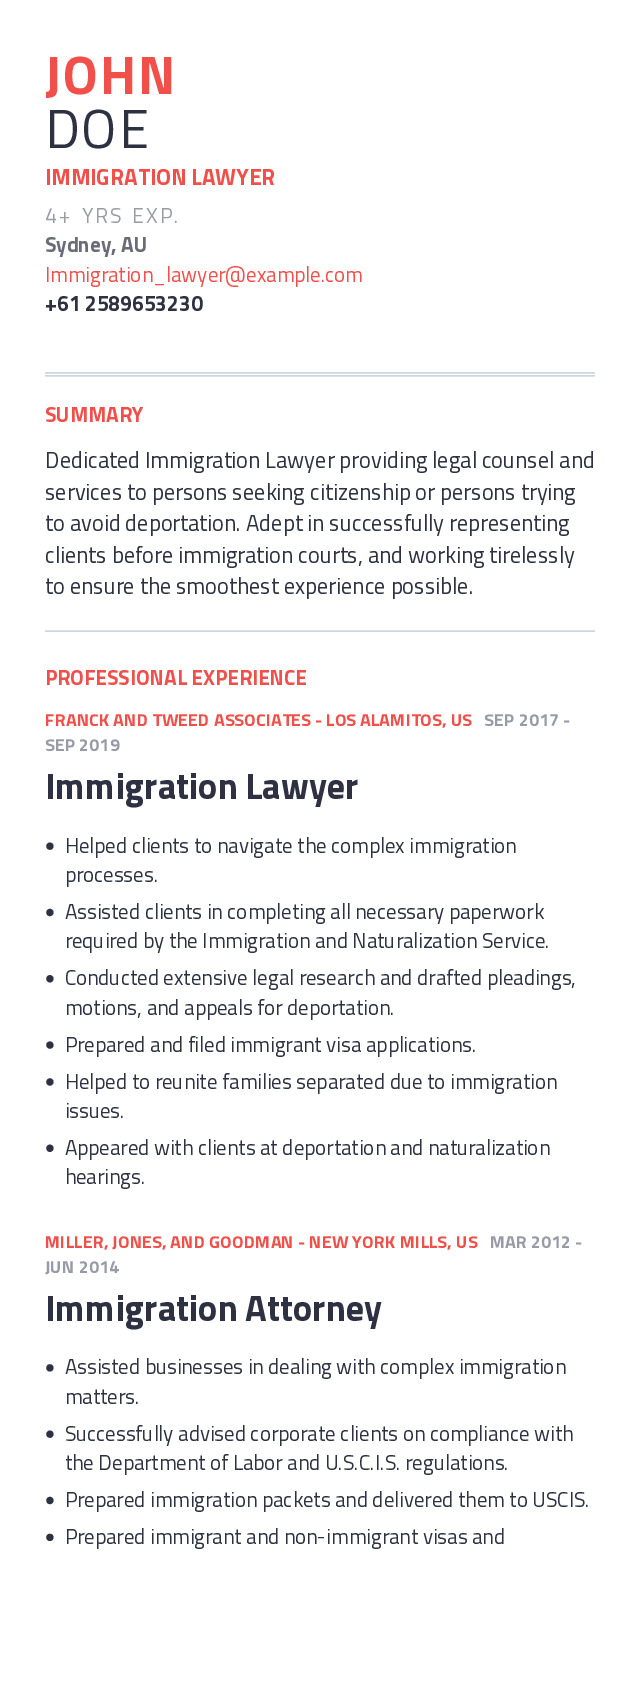 Immigration Lawyer Mobile Resume Example